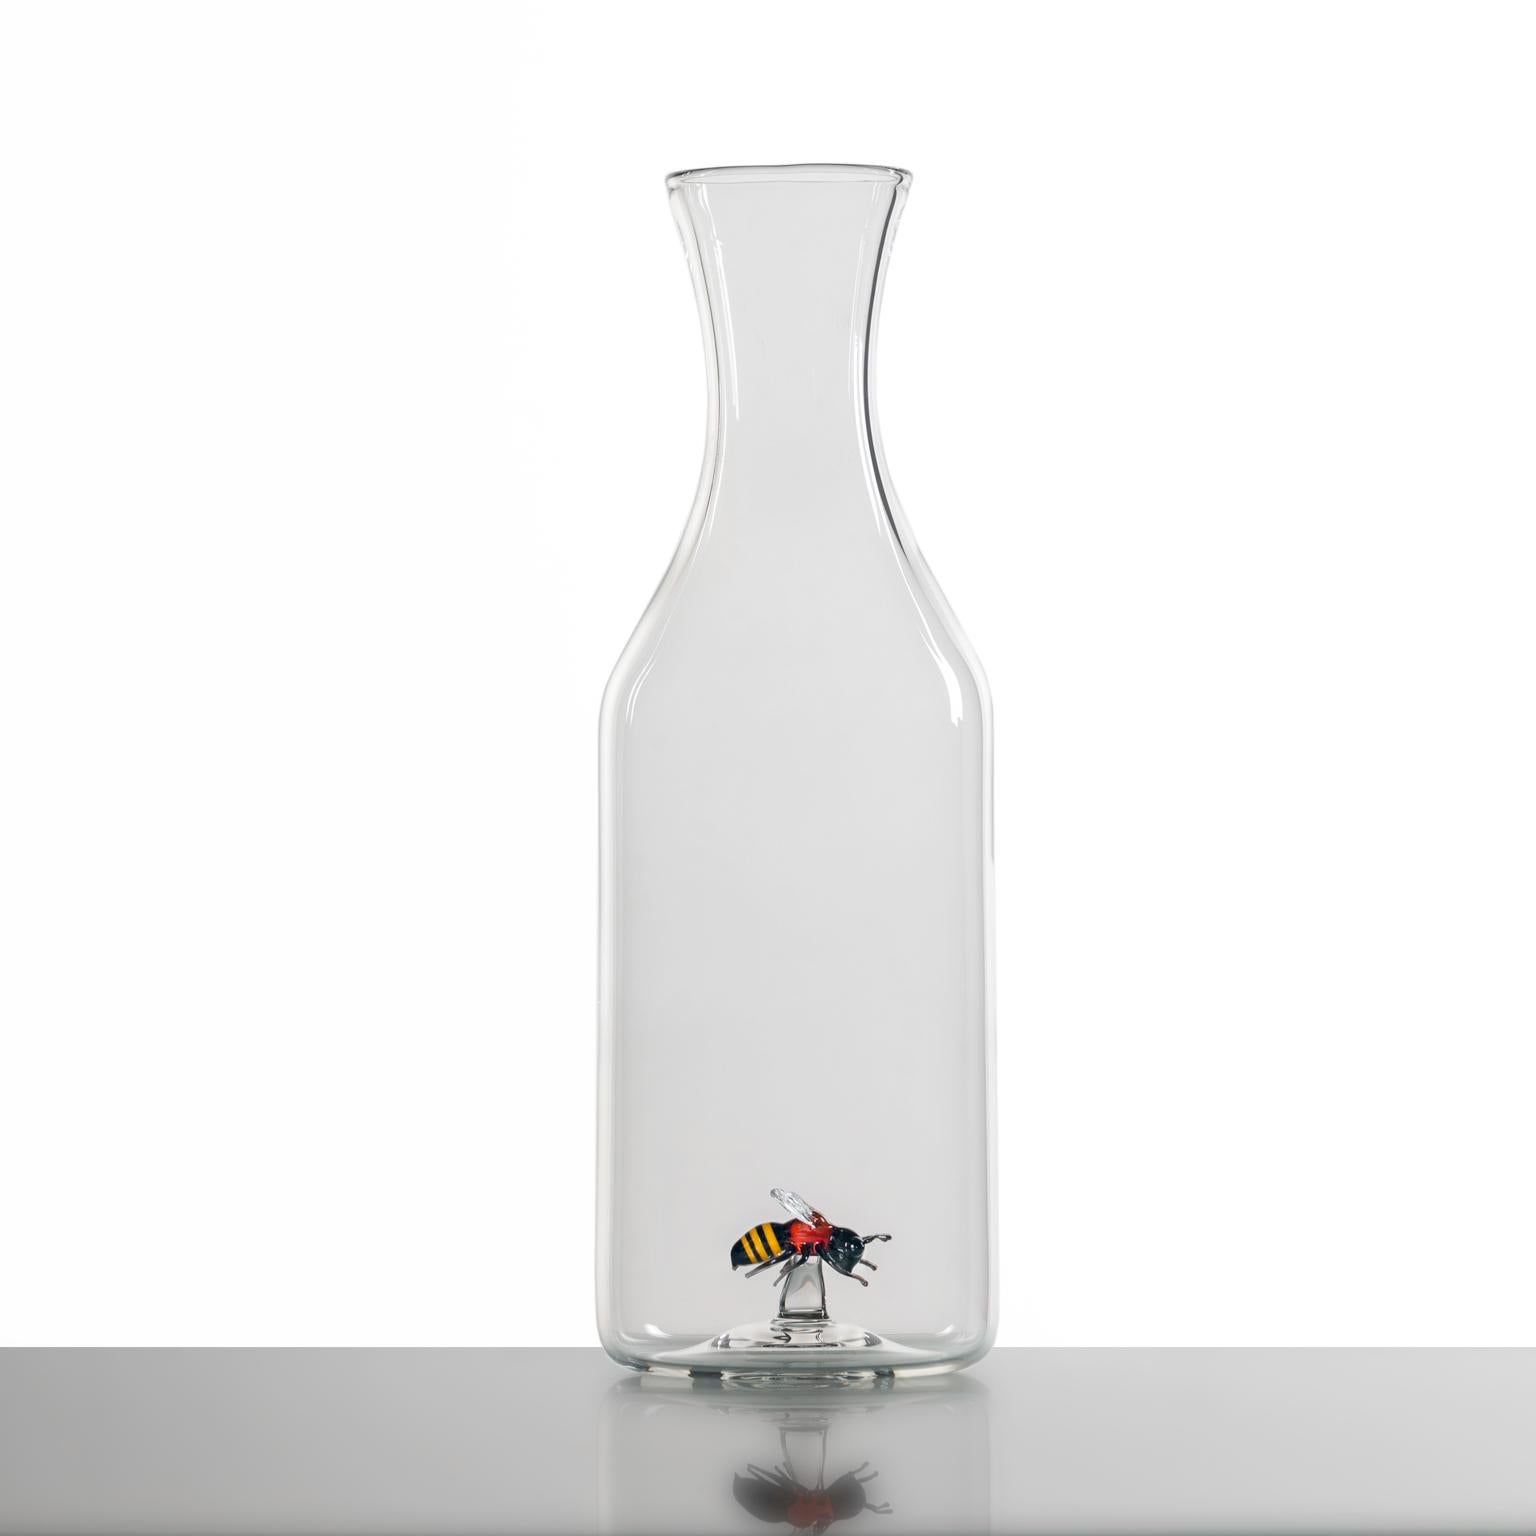 'Bee Bottle'
A Hand Blown Glass Bottle by Simone Crestani

A sleek glass bottle, elegant in its iconic transparency. Within it a small bee, portrayed in all its delicate essence, is the true protagonist of this work. The only note of color,